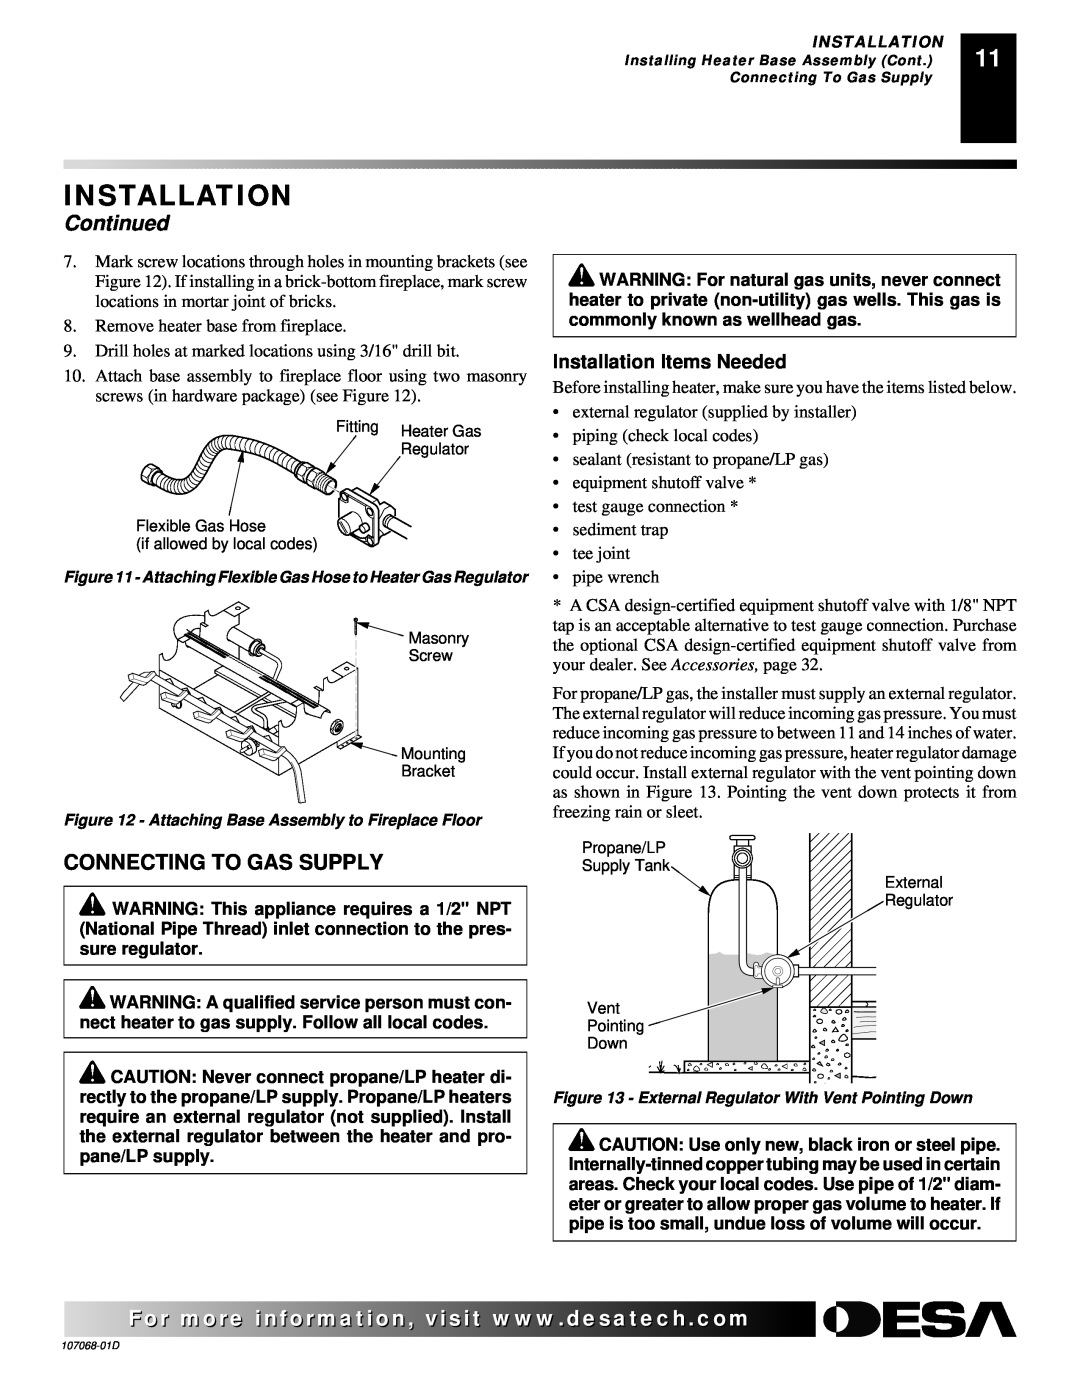 Desa CGS3124P installation manual Connecting To Gas Supply, Installation, Continued 